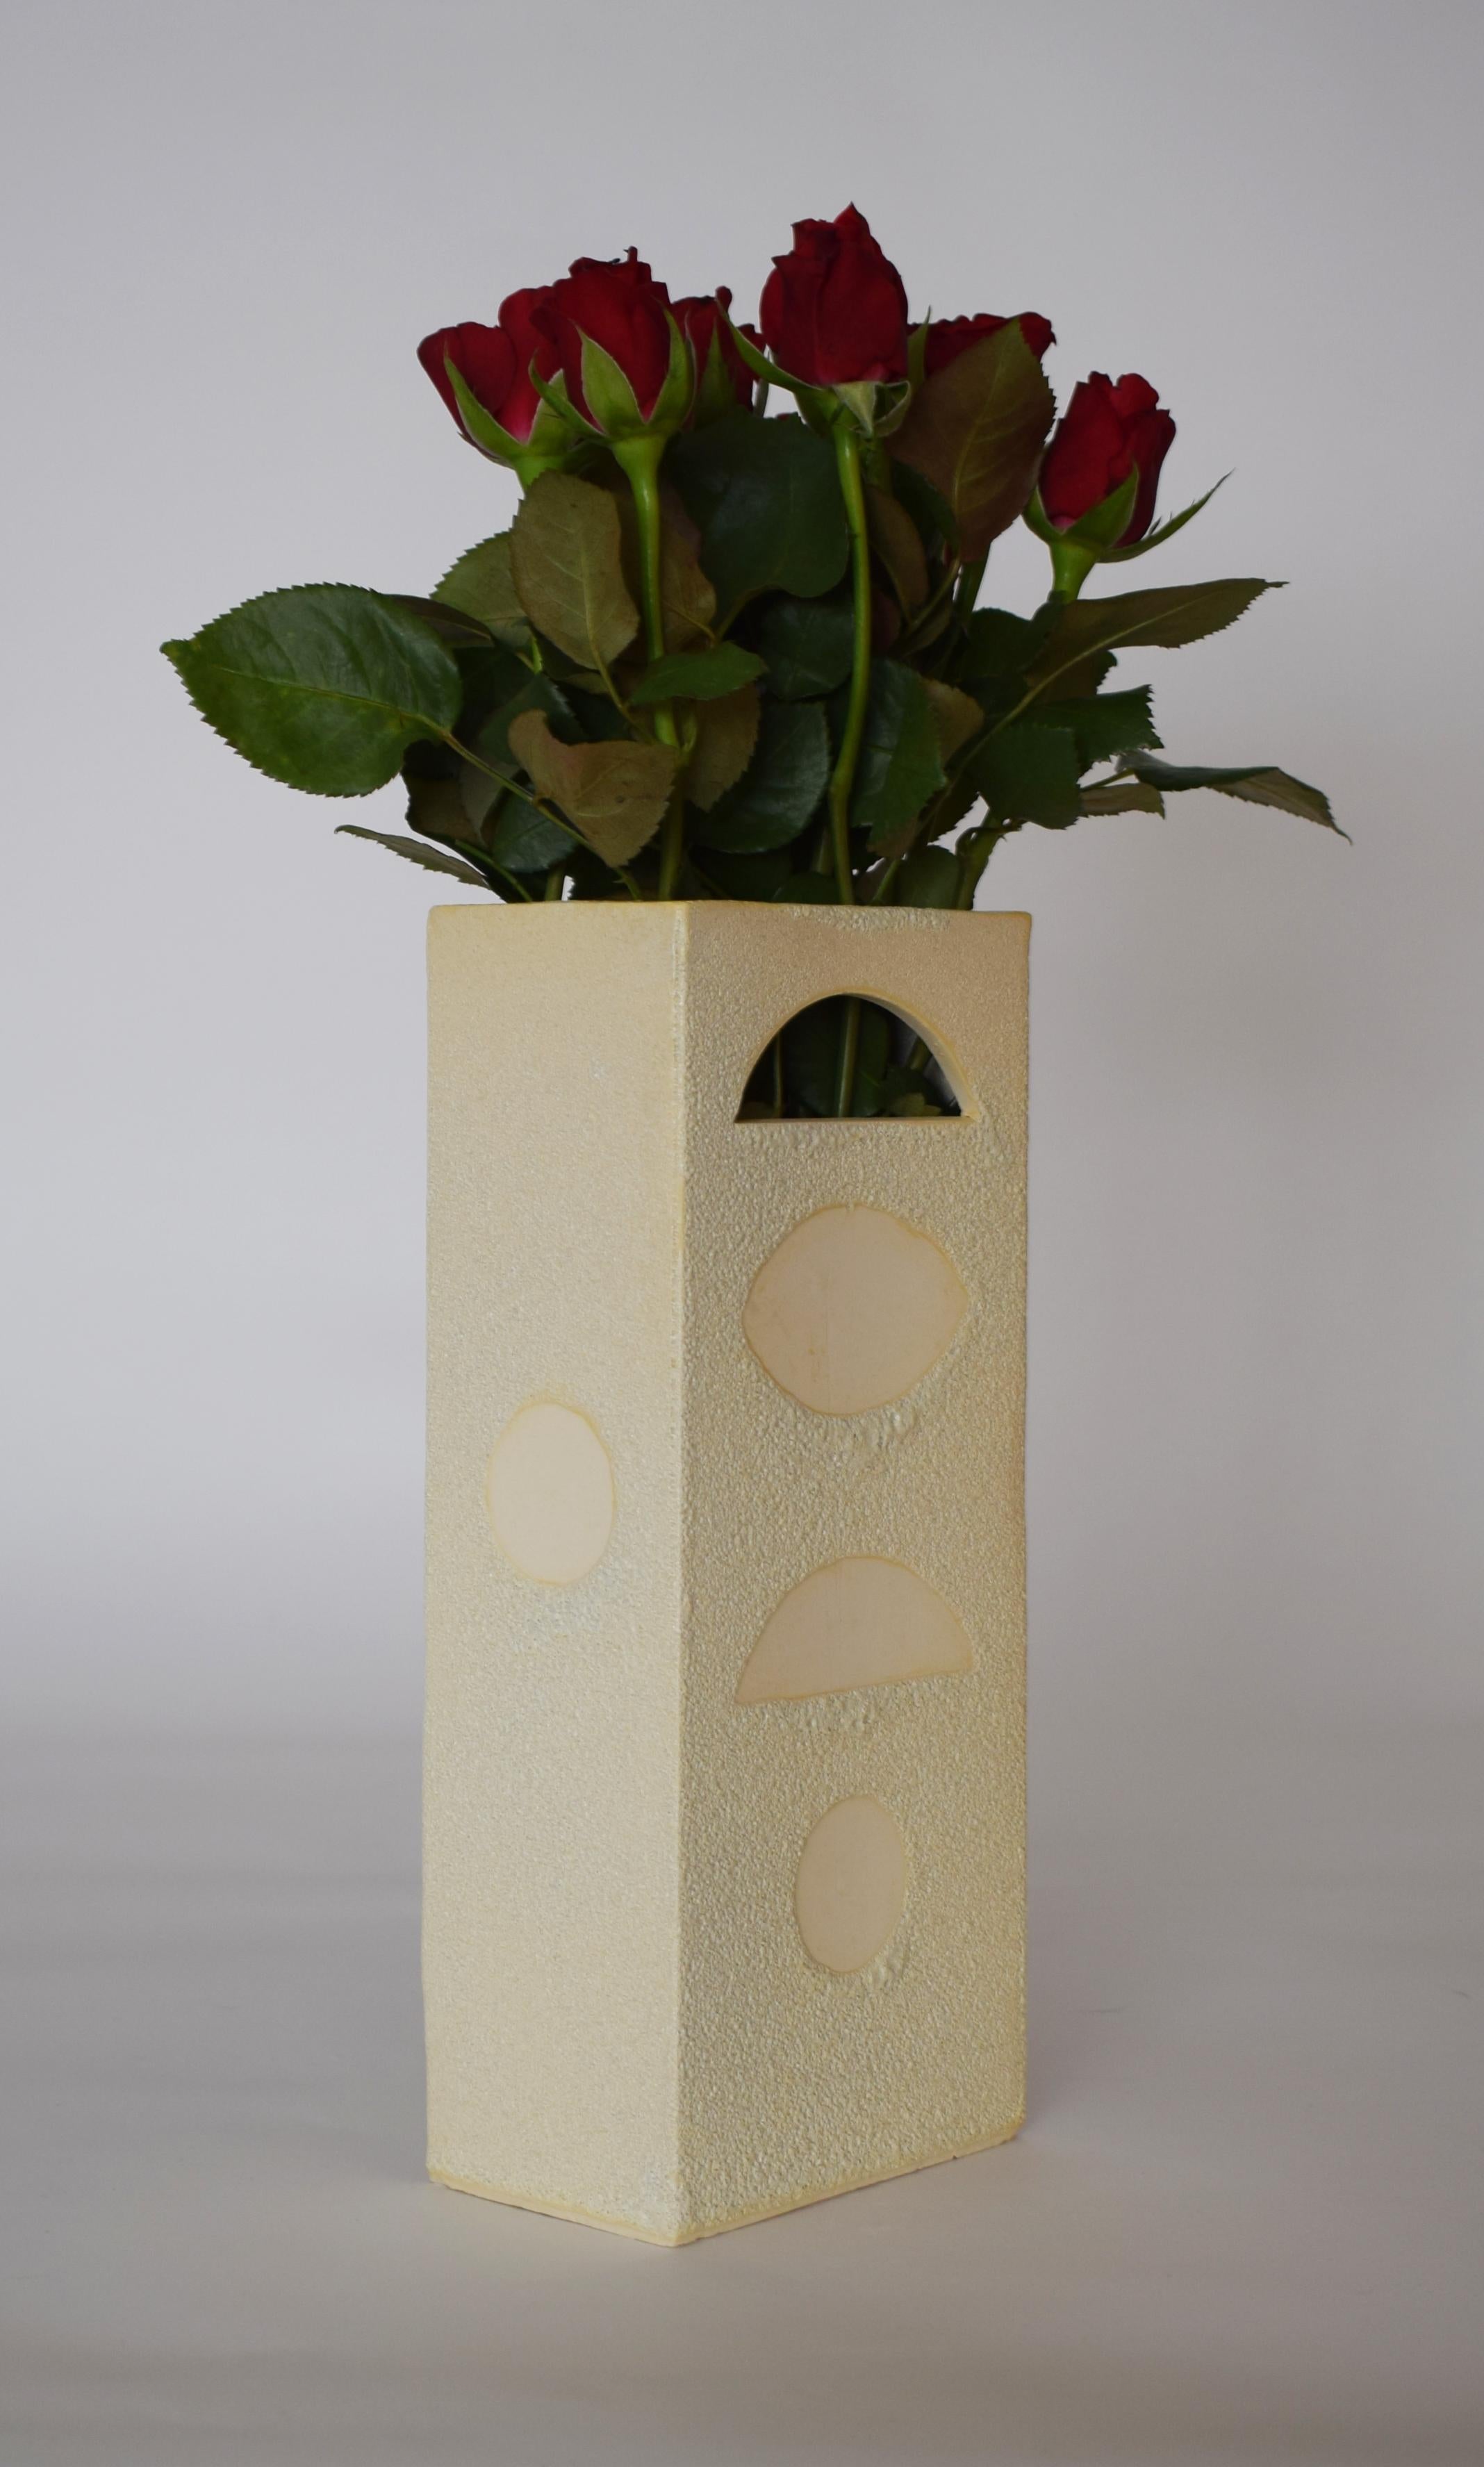 Modern Unique Hand-crafted Ceramic Vase (Parliament B) by James Hicks For Sale